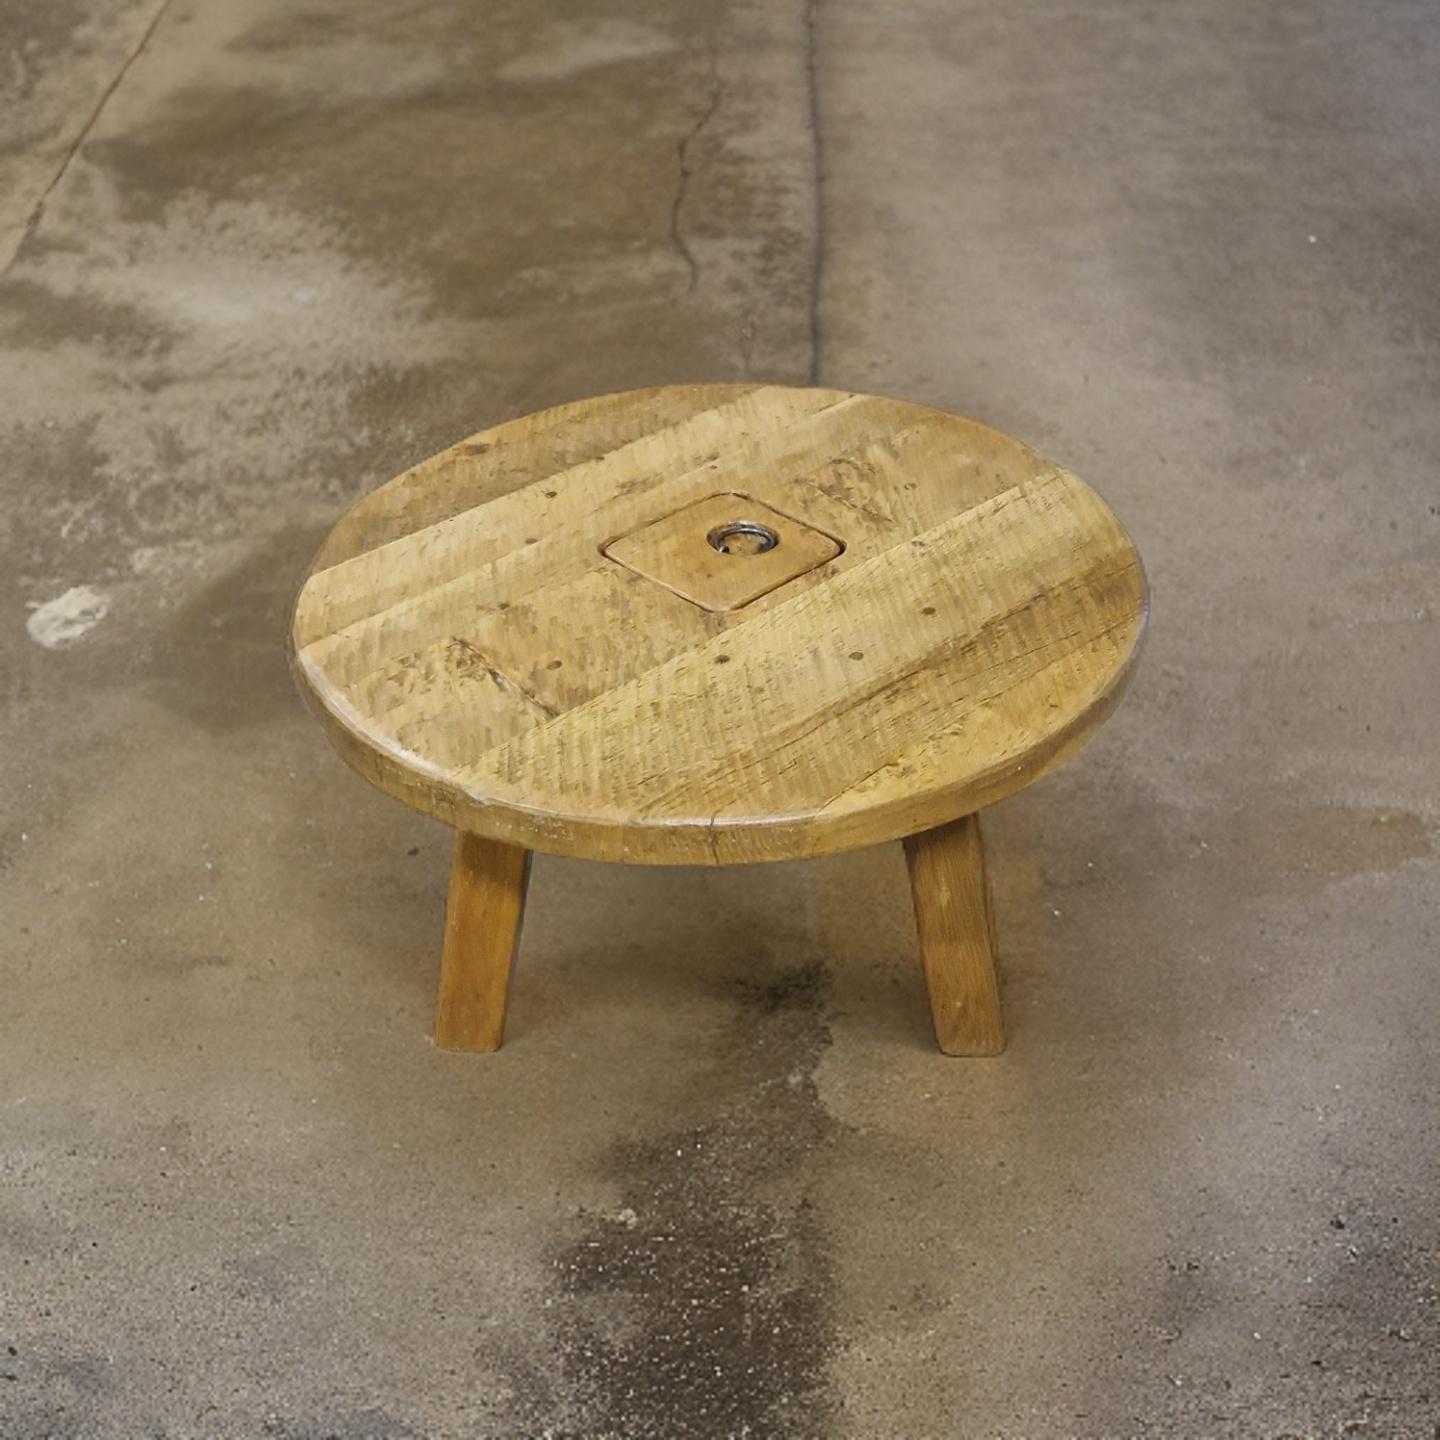 Round brutalist wabi sabi coffee table. Hand made from solid oak. It has a thick circular top standing on 4 solid oak legs. There is a storage space in the middle with a lid and a wrought iron handle. The table measures 100cm in diameter. 

Natural